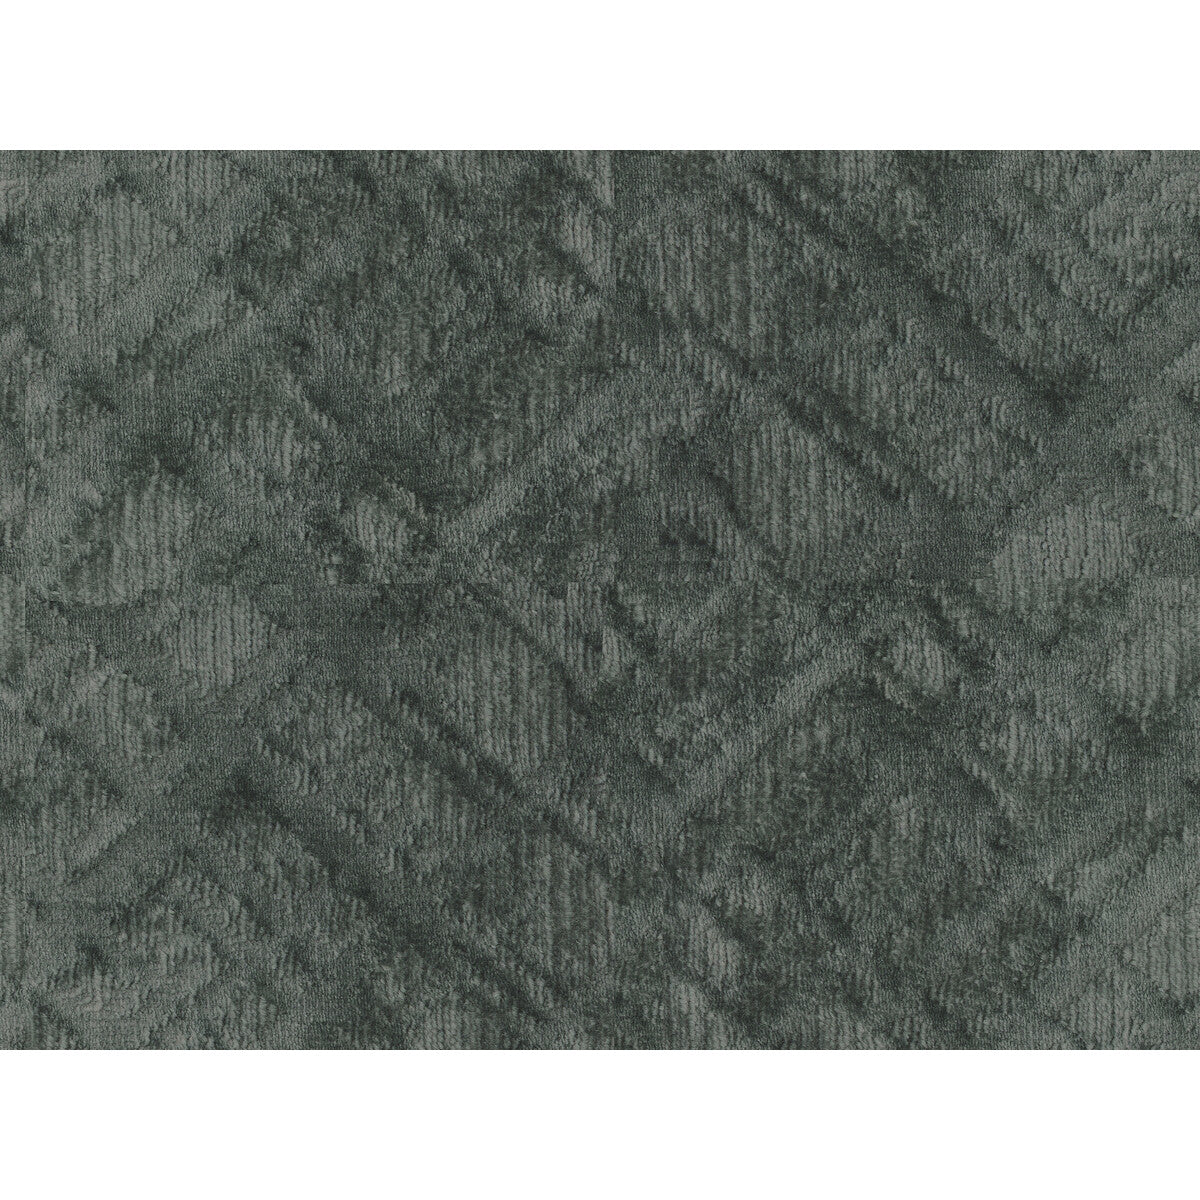 Cross The Line fabric in silver sage color - pattern 34333.21.0 - by Kravet Couture